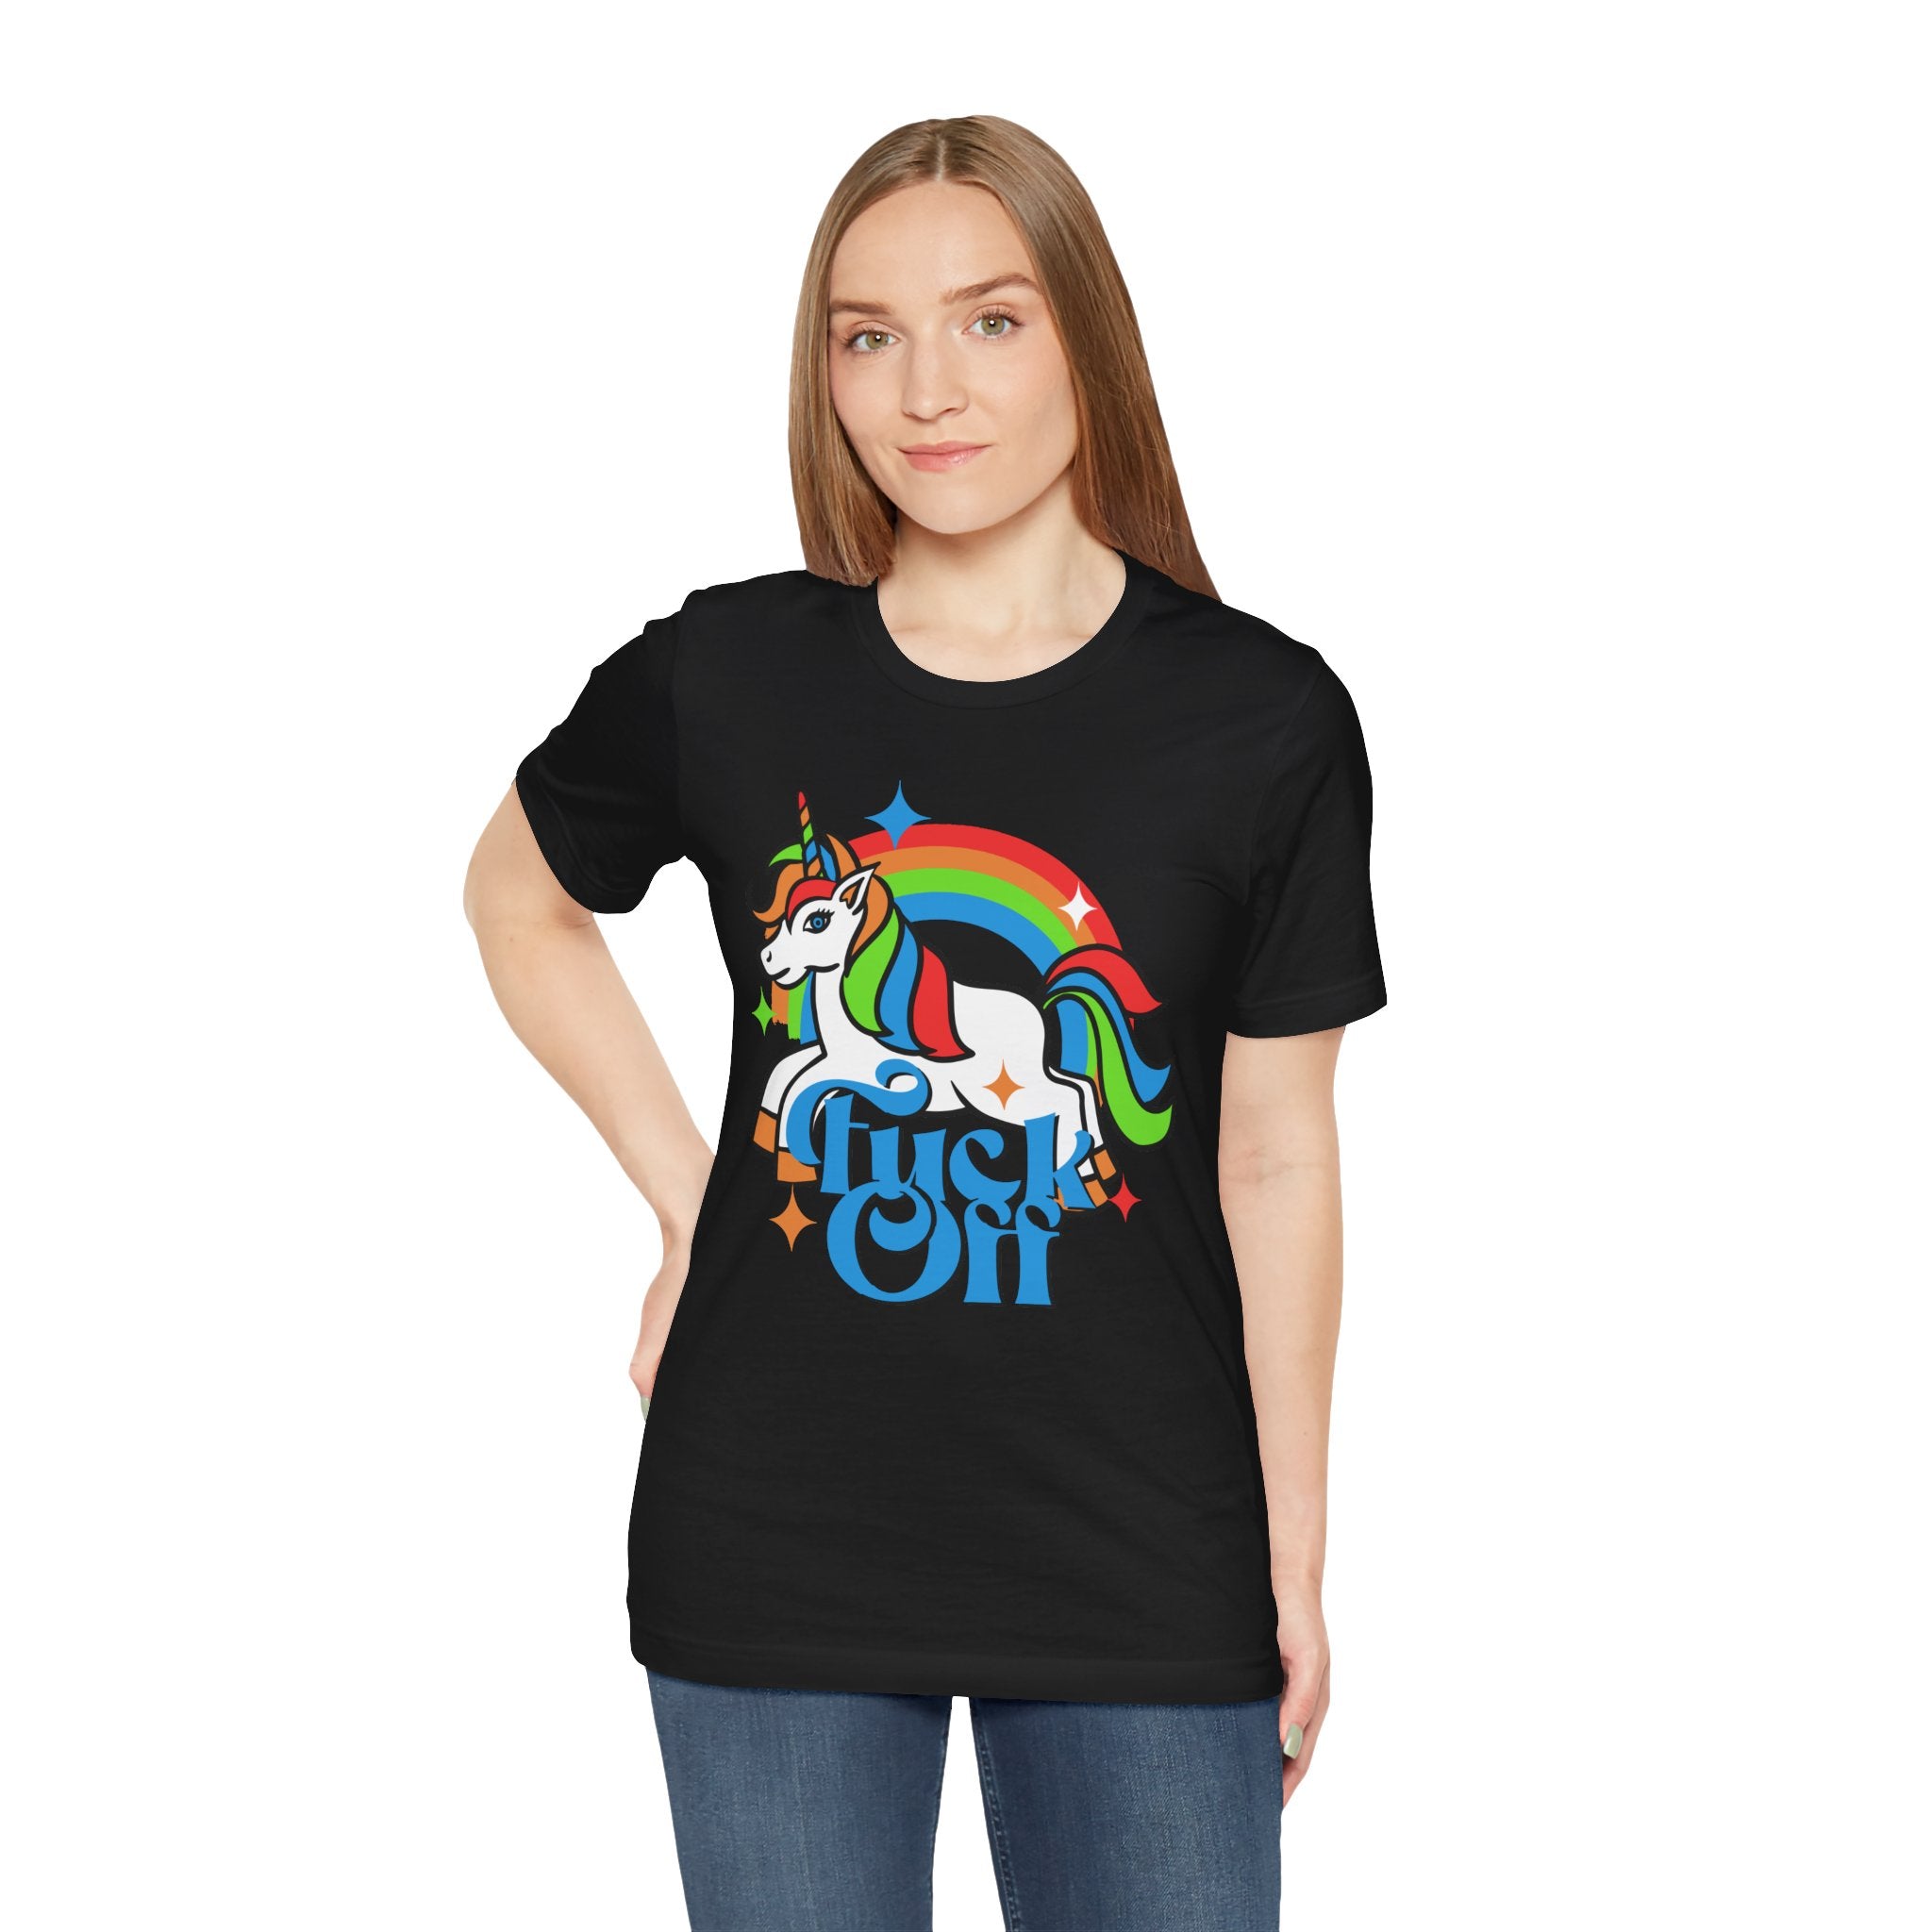 A woman wearing a F off T-Shirt with a colorful unicorn design and the phrase "just off" printed in quality print on it.